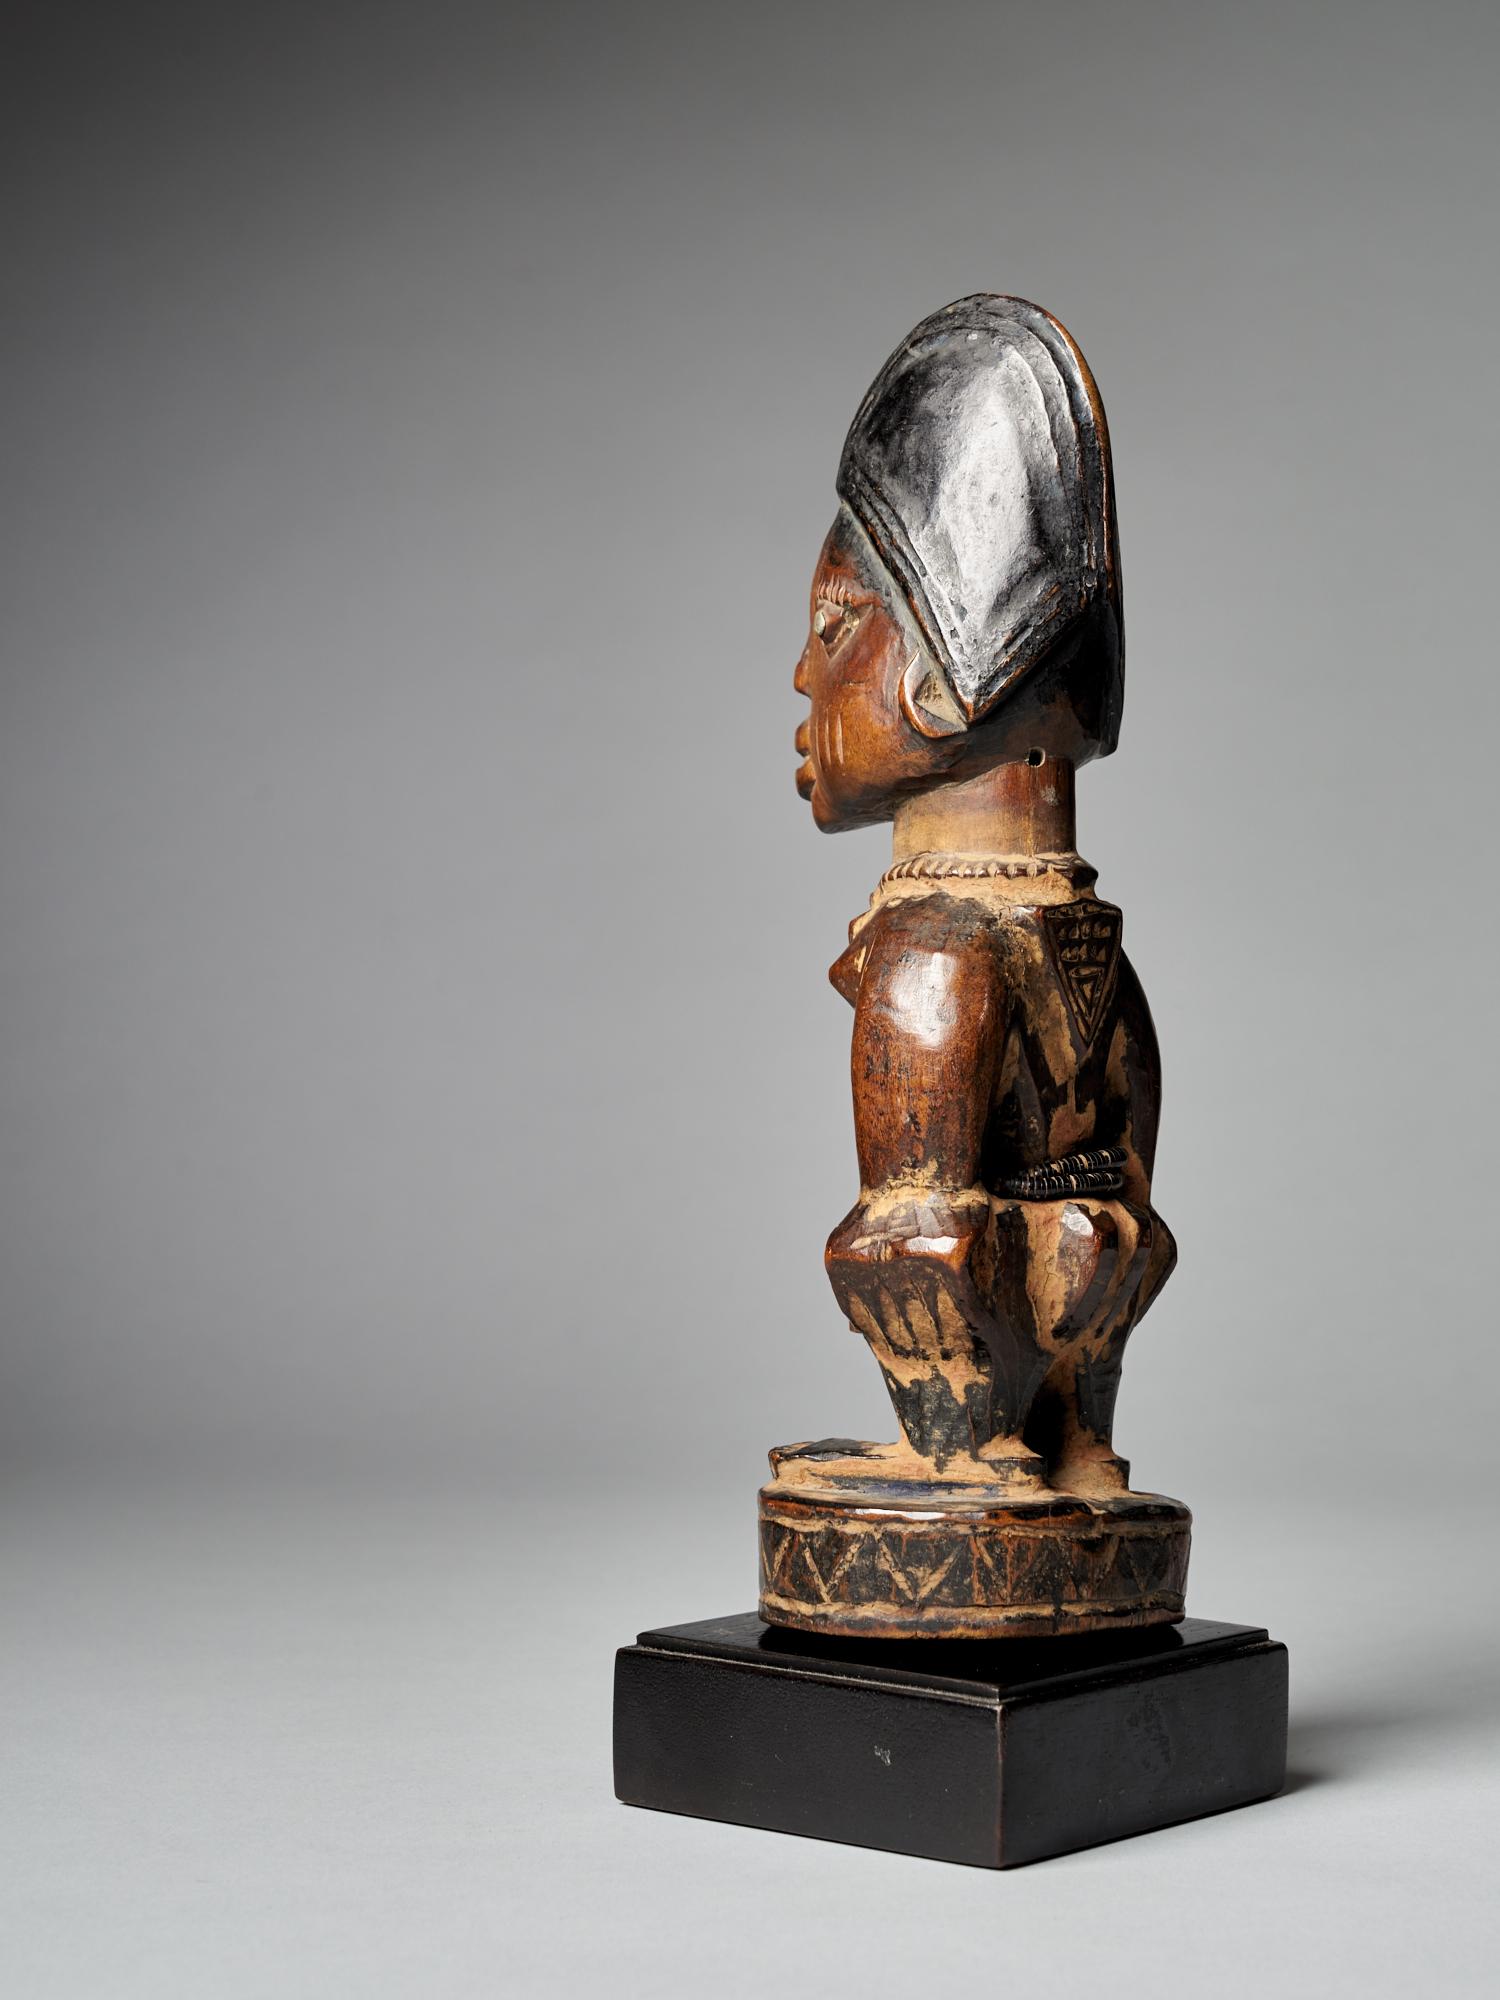 A finely carved big Yoruba Male Ibeji figure with tall headdress, expressive eyes, original bead belt and heavy wear and polish from native use. Areas of encrusted cam wood powder between arms and around feet. Though the cause of the high rate of